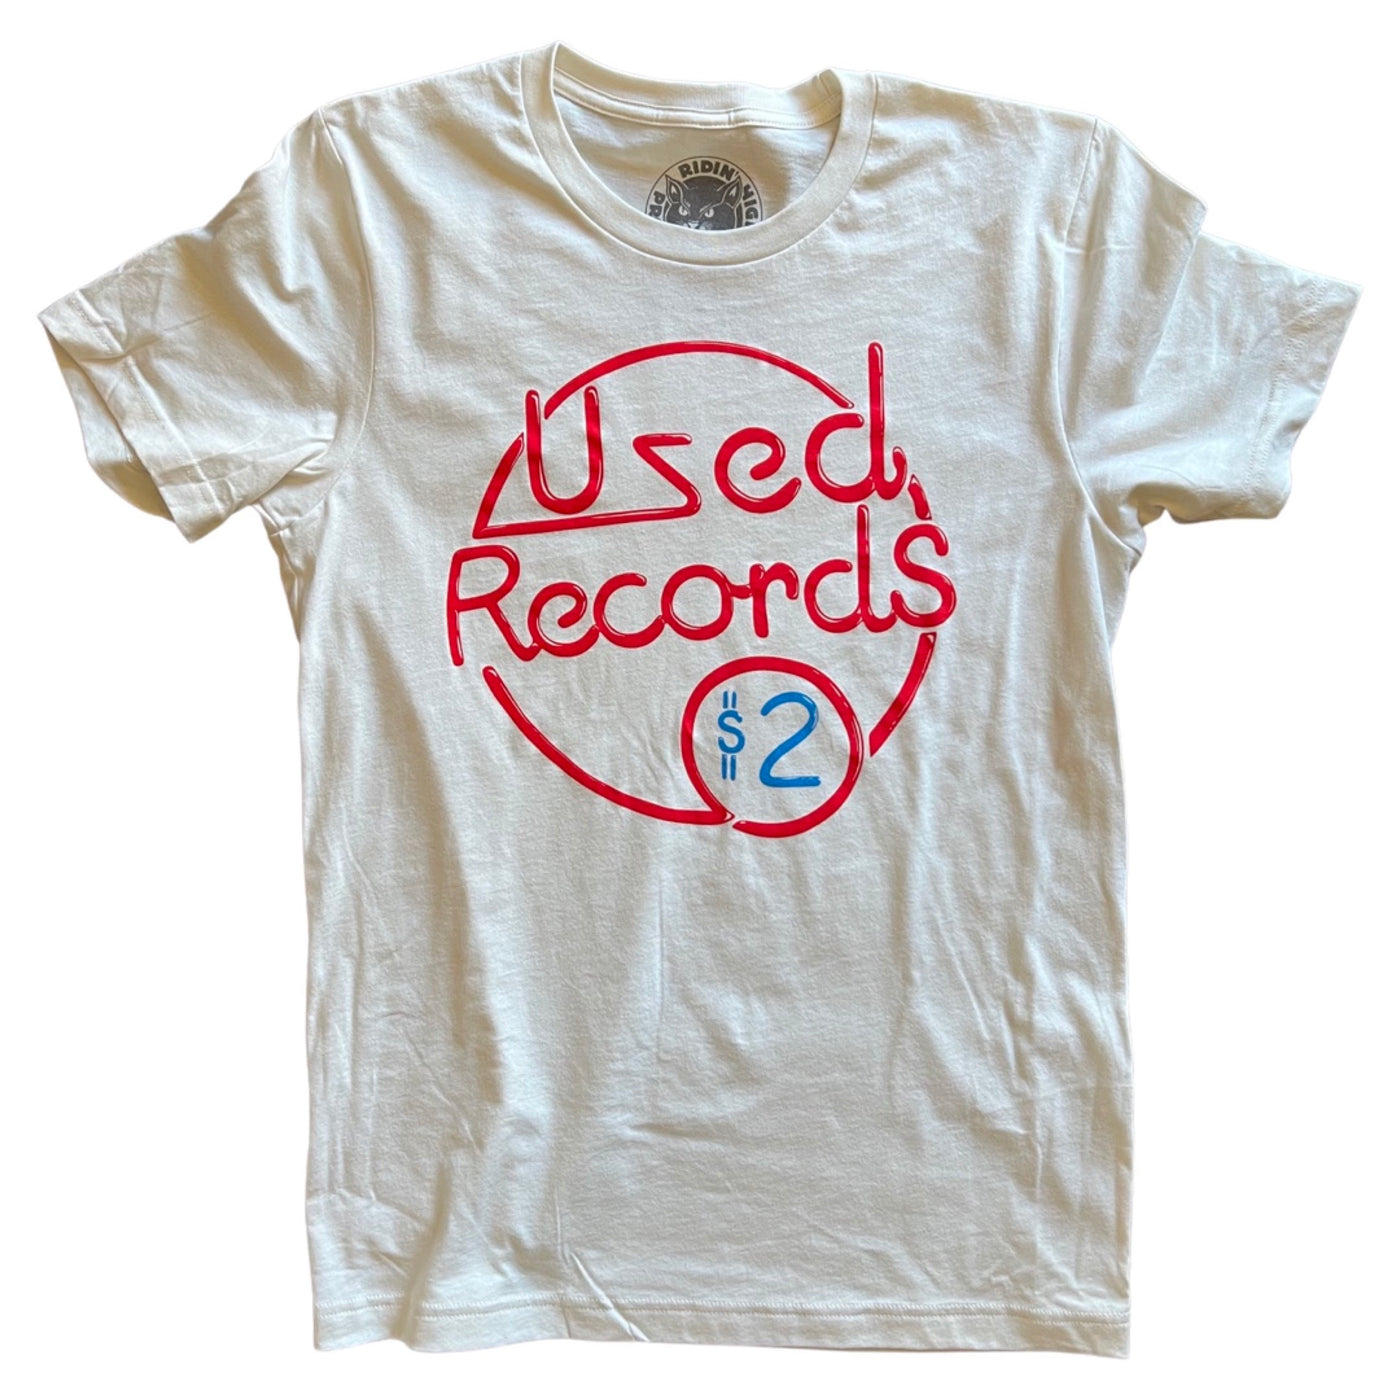 Used Records Tee by Ridin' High